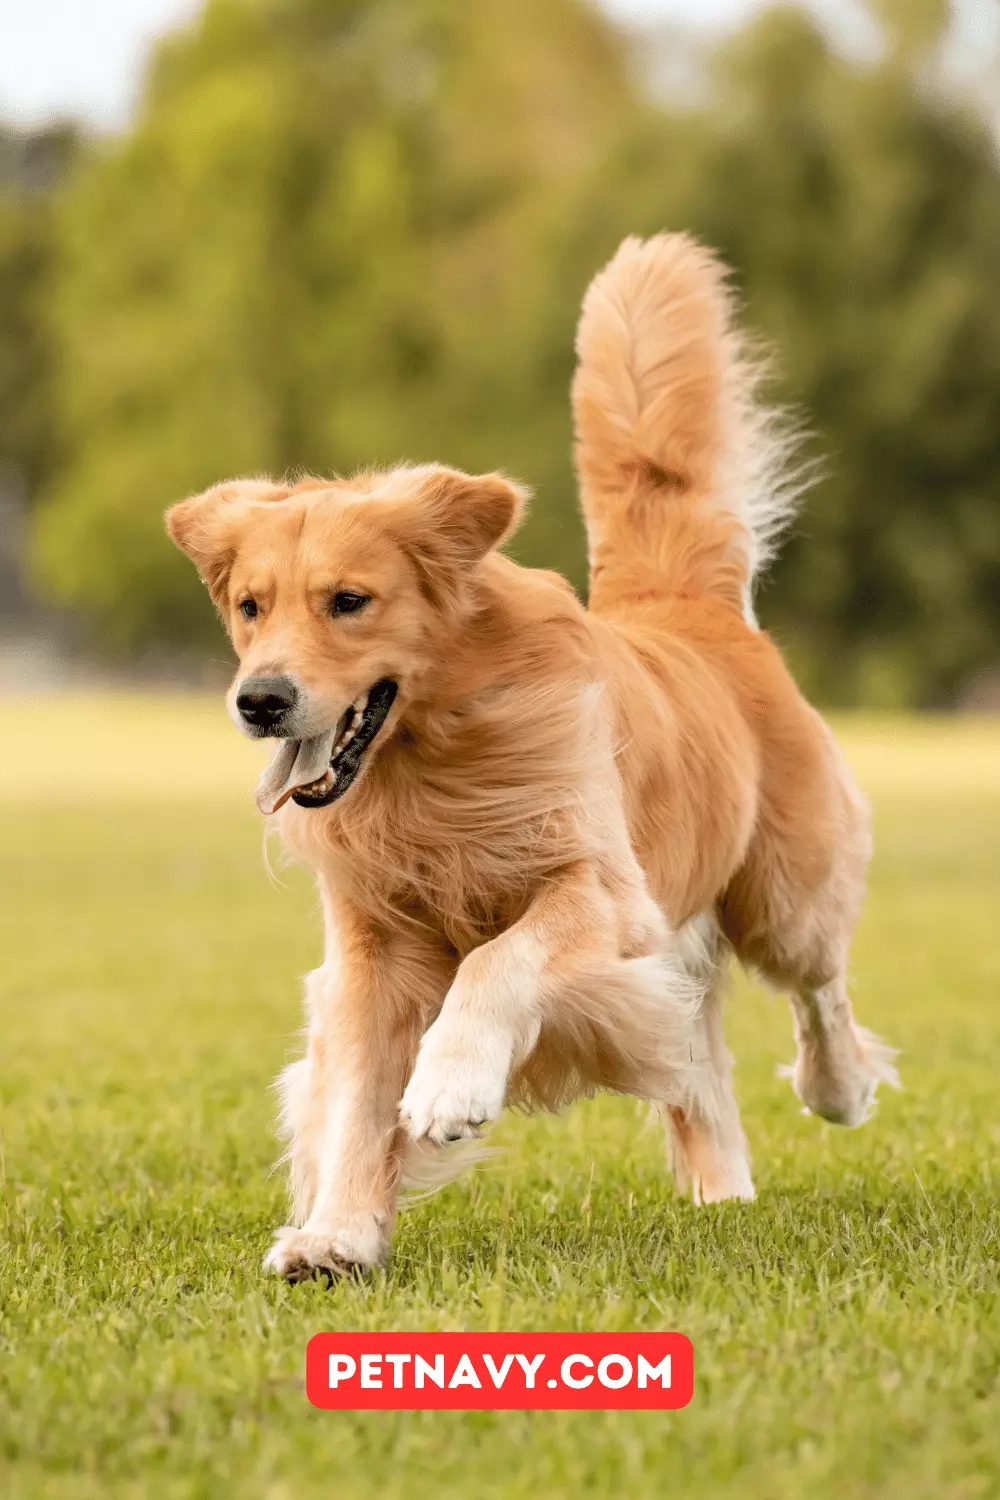 How Much Does a Golden Retriever Cost in the United States in 2023